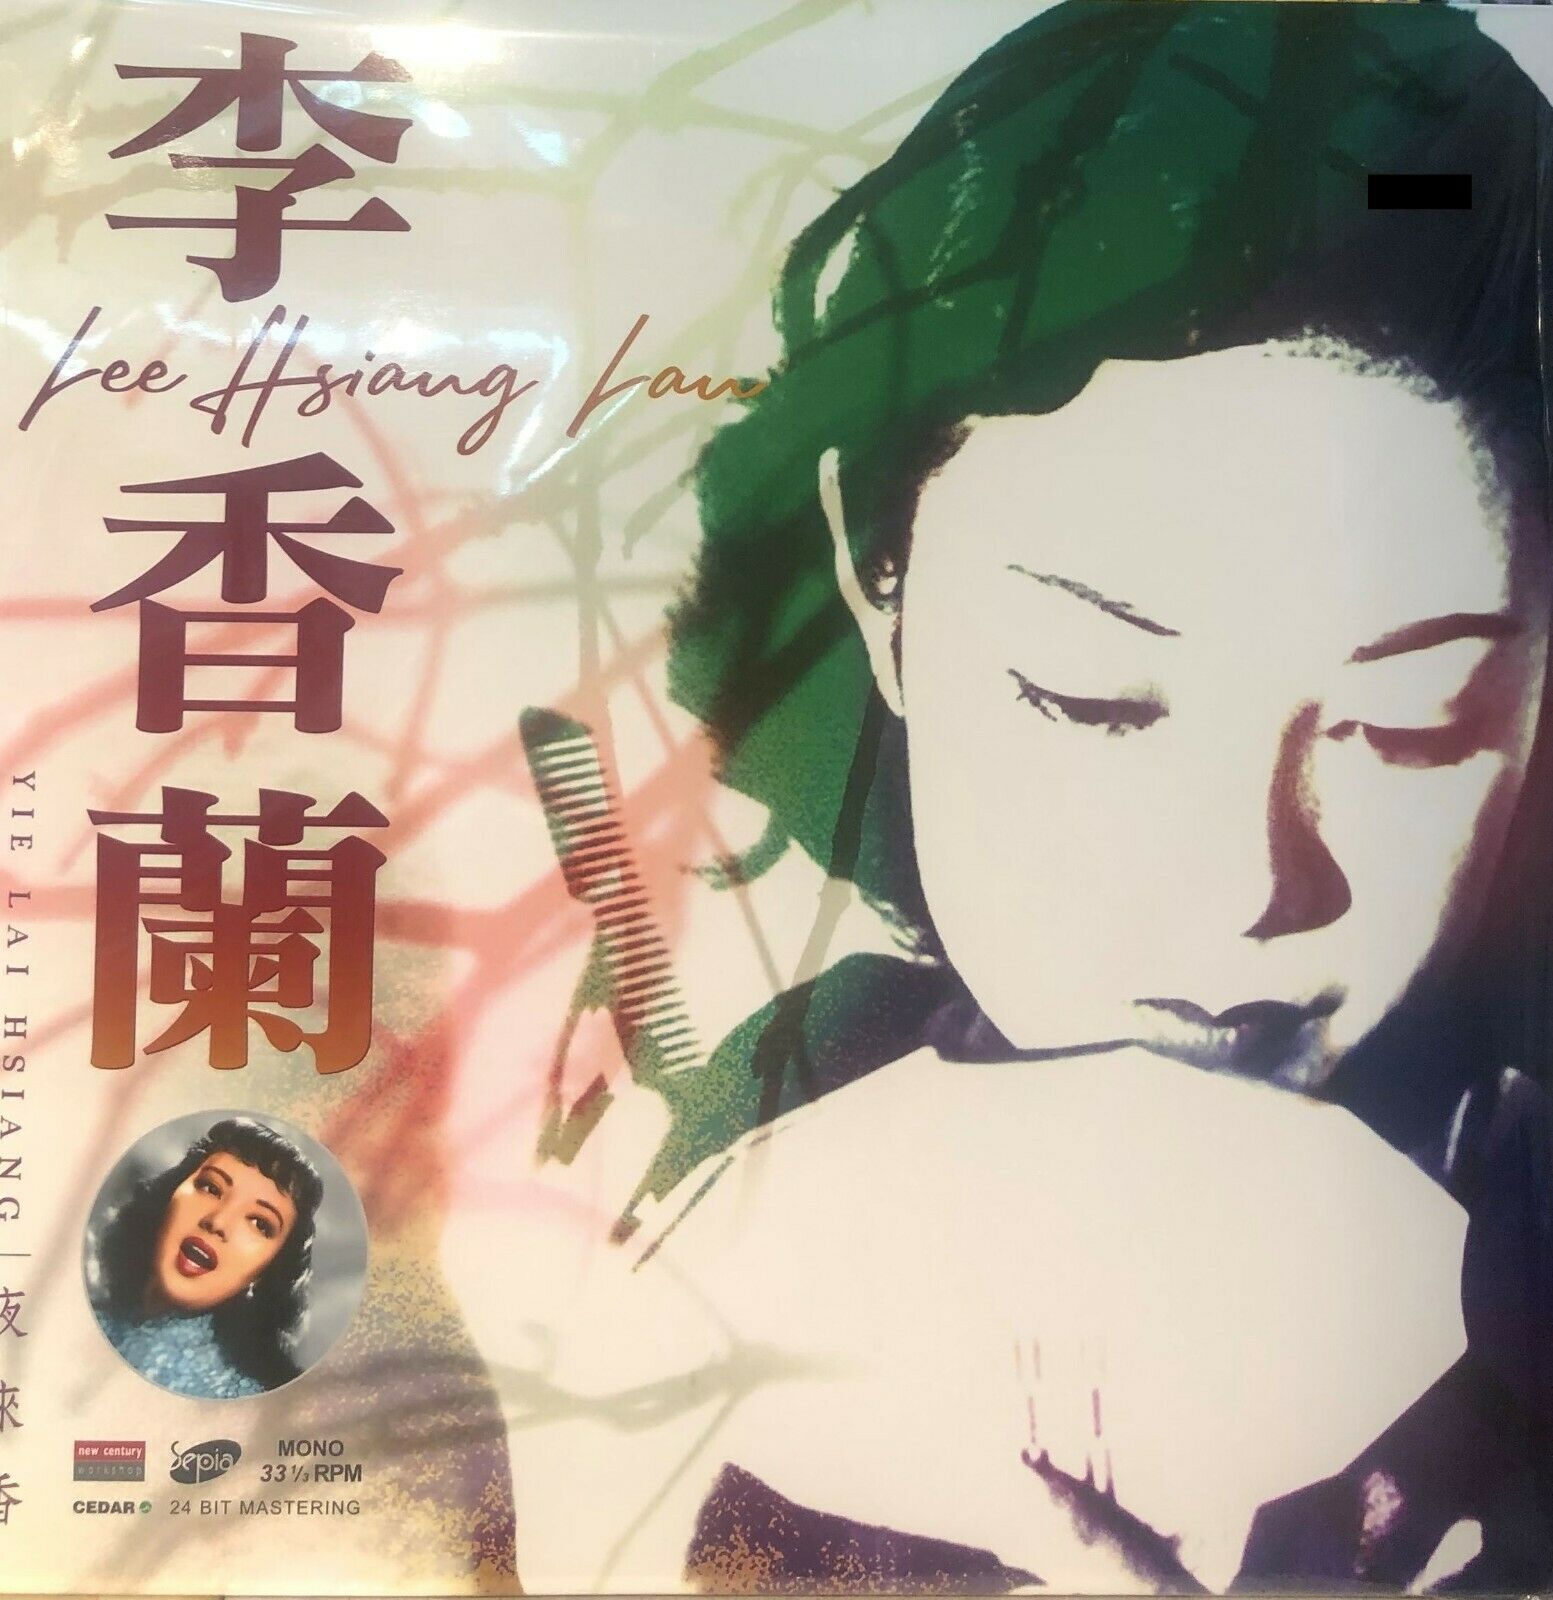 LEE HSIANG LAN - 李香蘭 (PICTURE VINYL) MADE IN EU